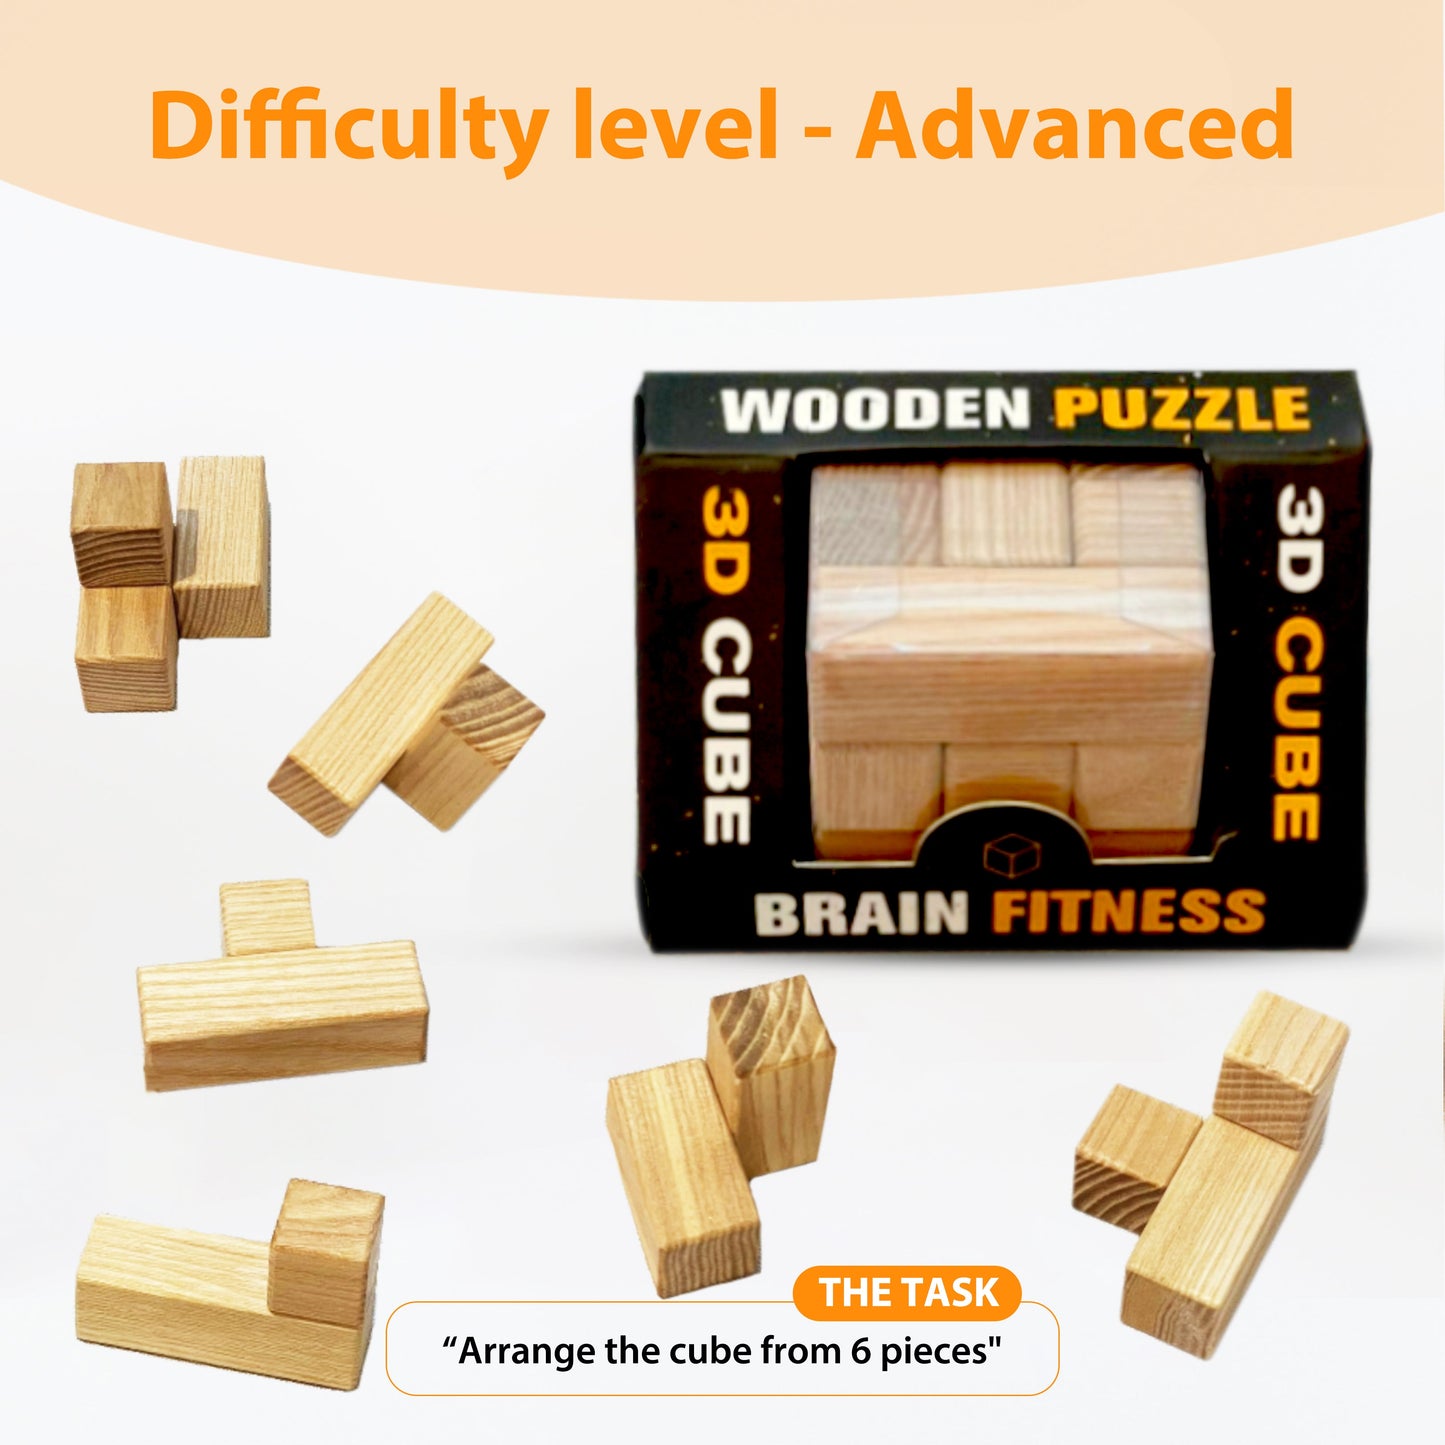 Wooden Cube Puzzle, 3D Wooden Puzzles for Adults, Brain Test Puzzle (5x5x5 cm) or (2x2x2 in)